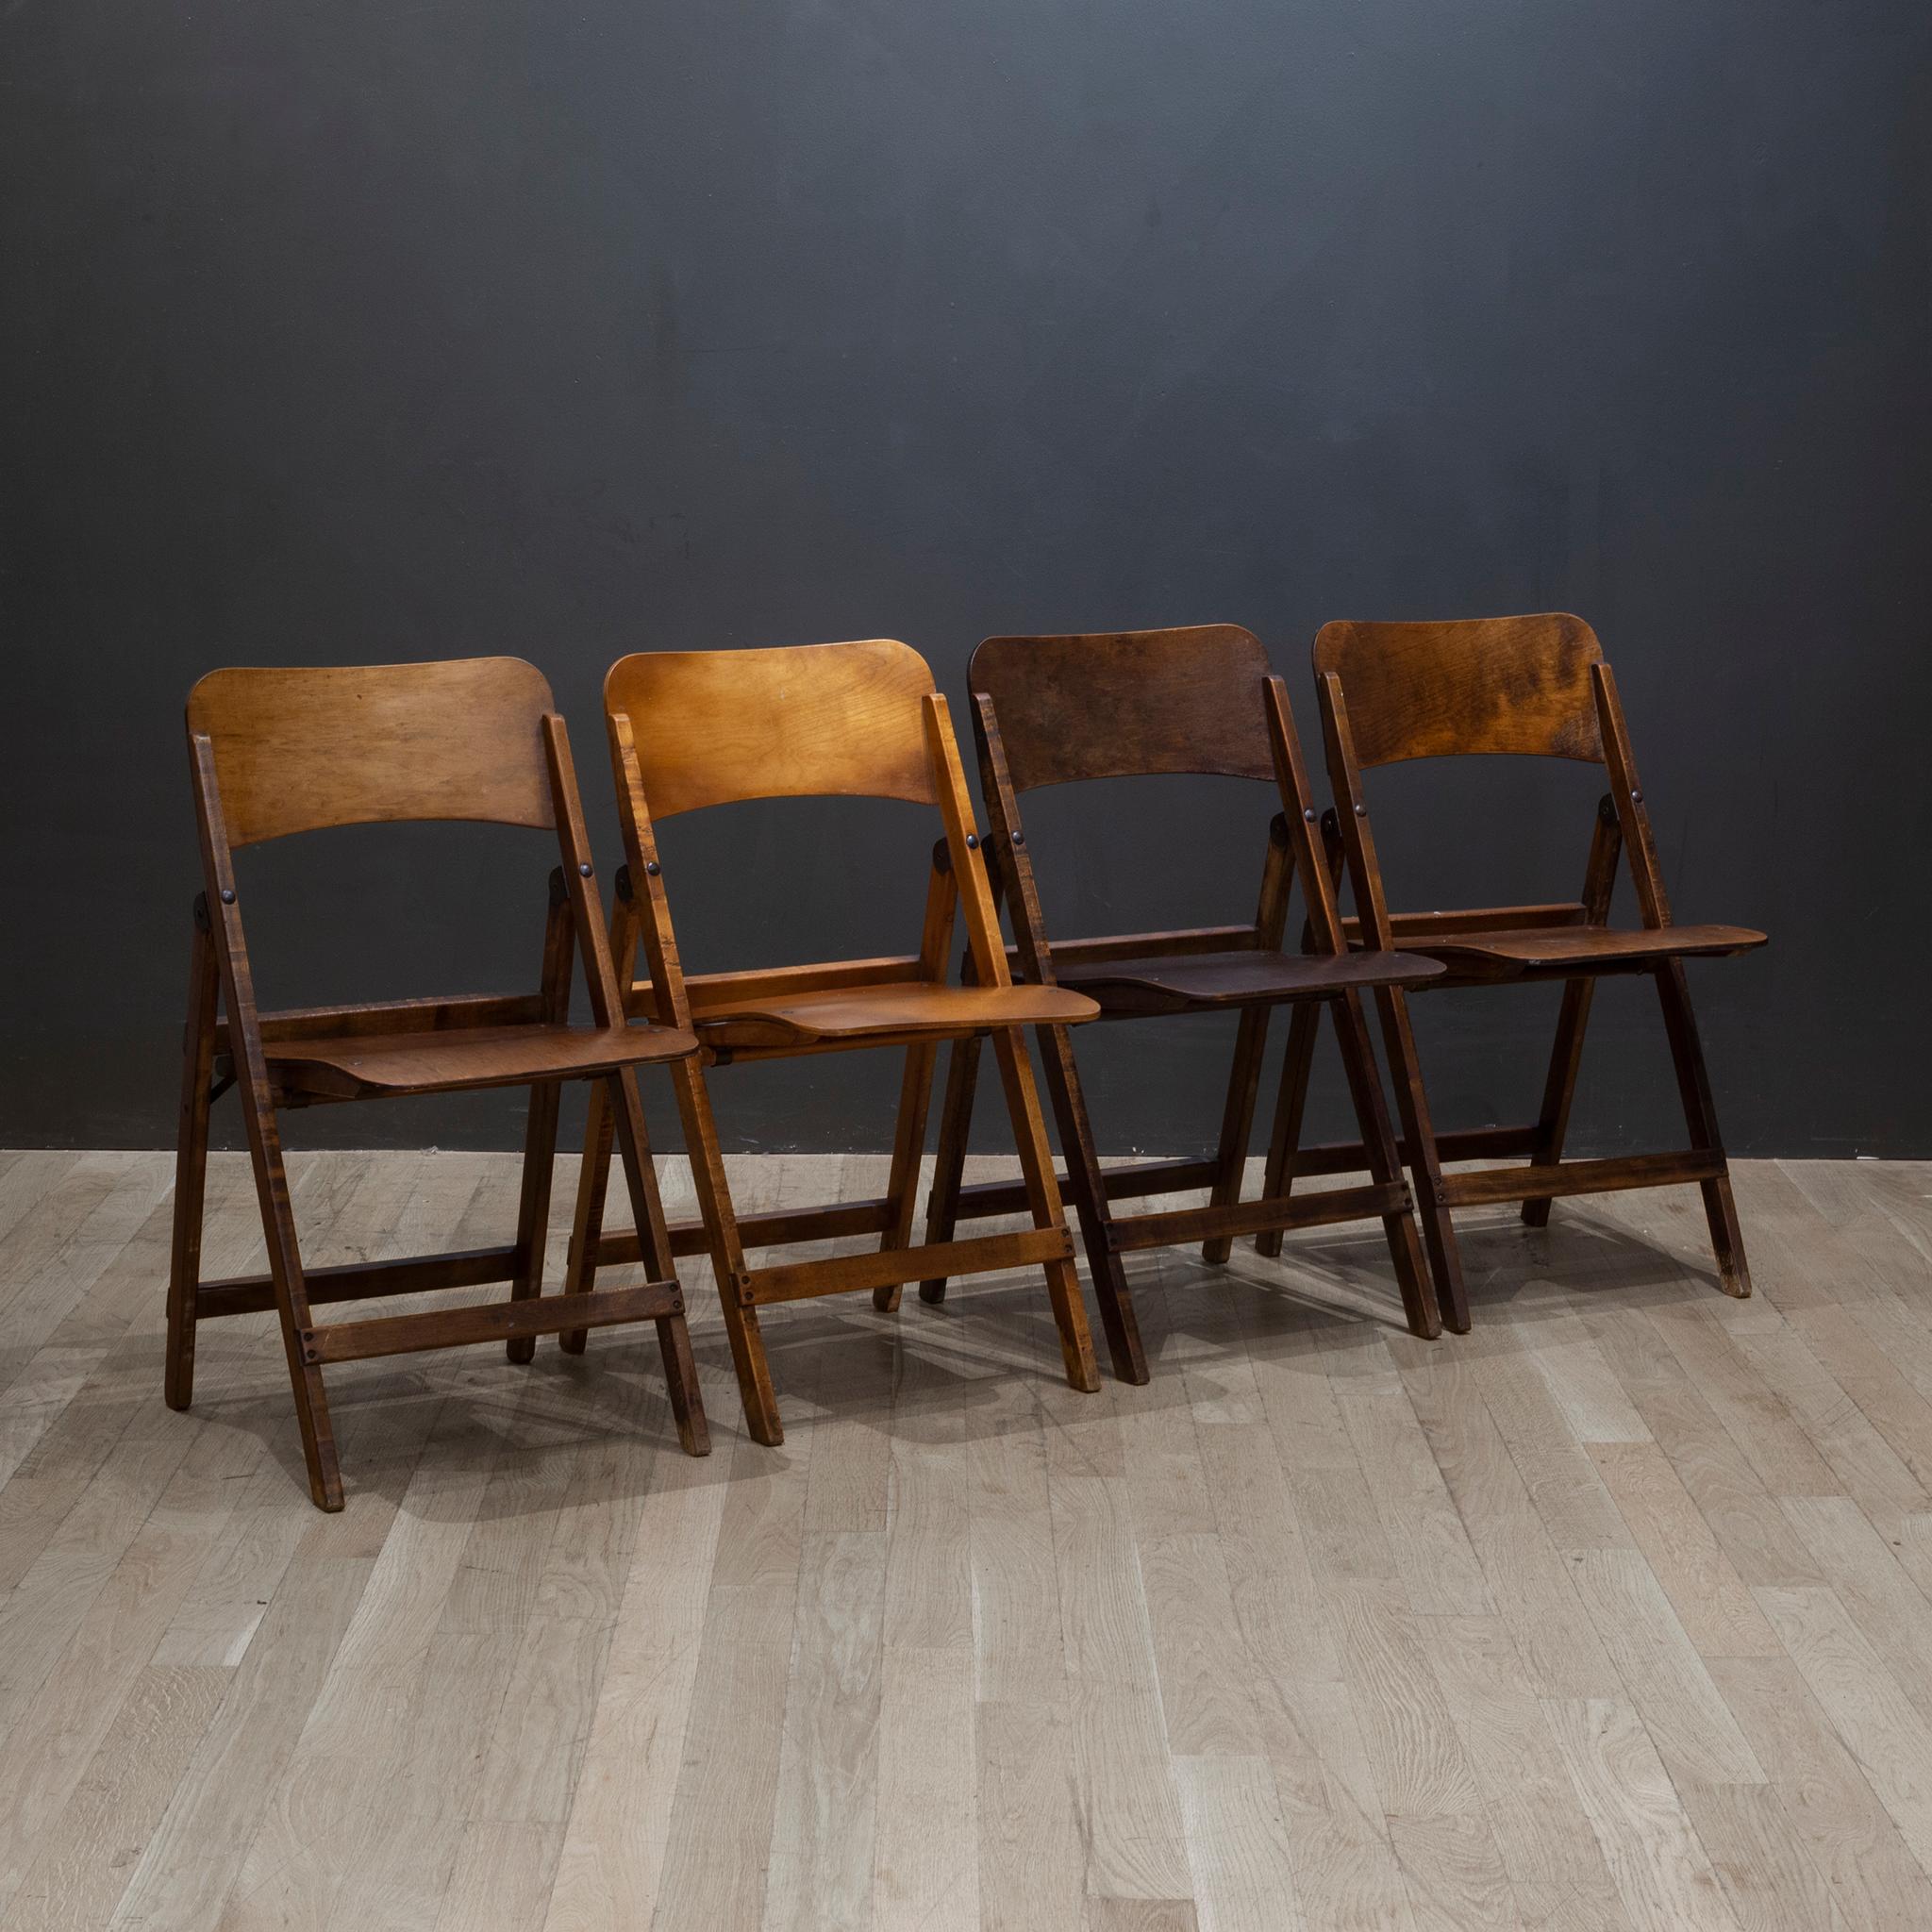 Industrial Set of Early 20th c. Wooden Folding Chairs, c.1930-1940